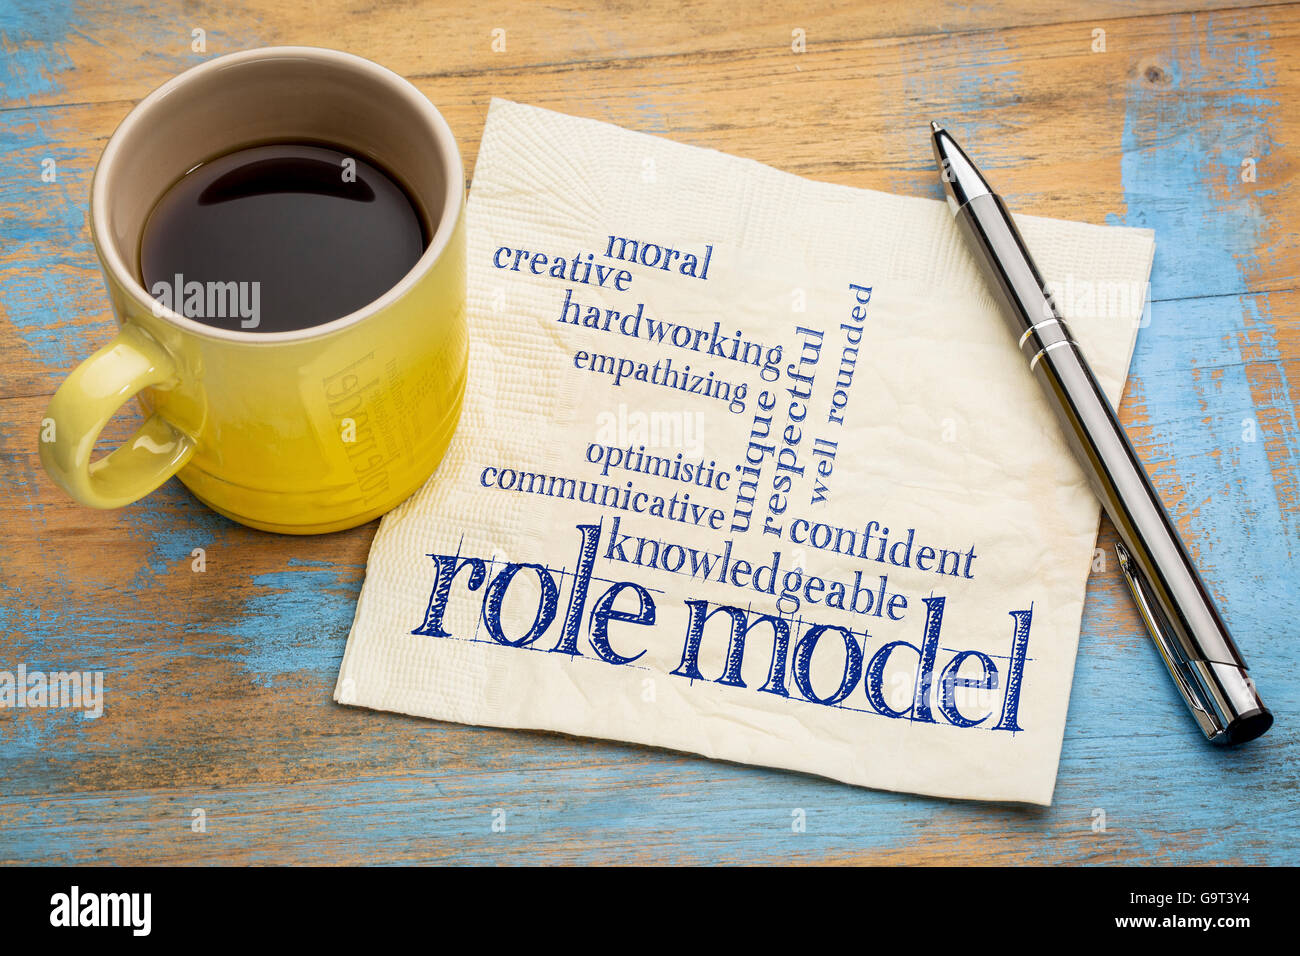 role model qualities word cloud -handwriting on a napkin with a cup of coffee Stock Photo